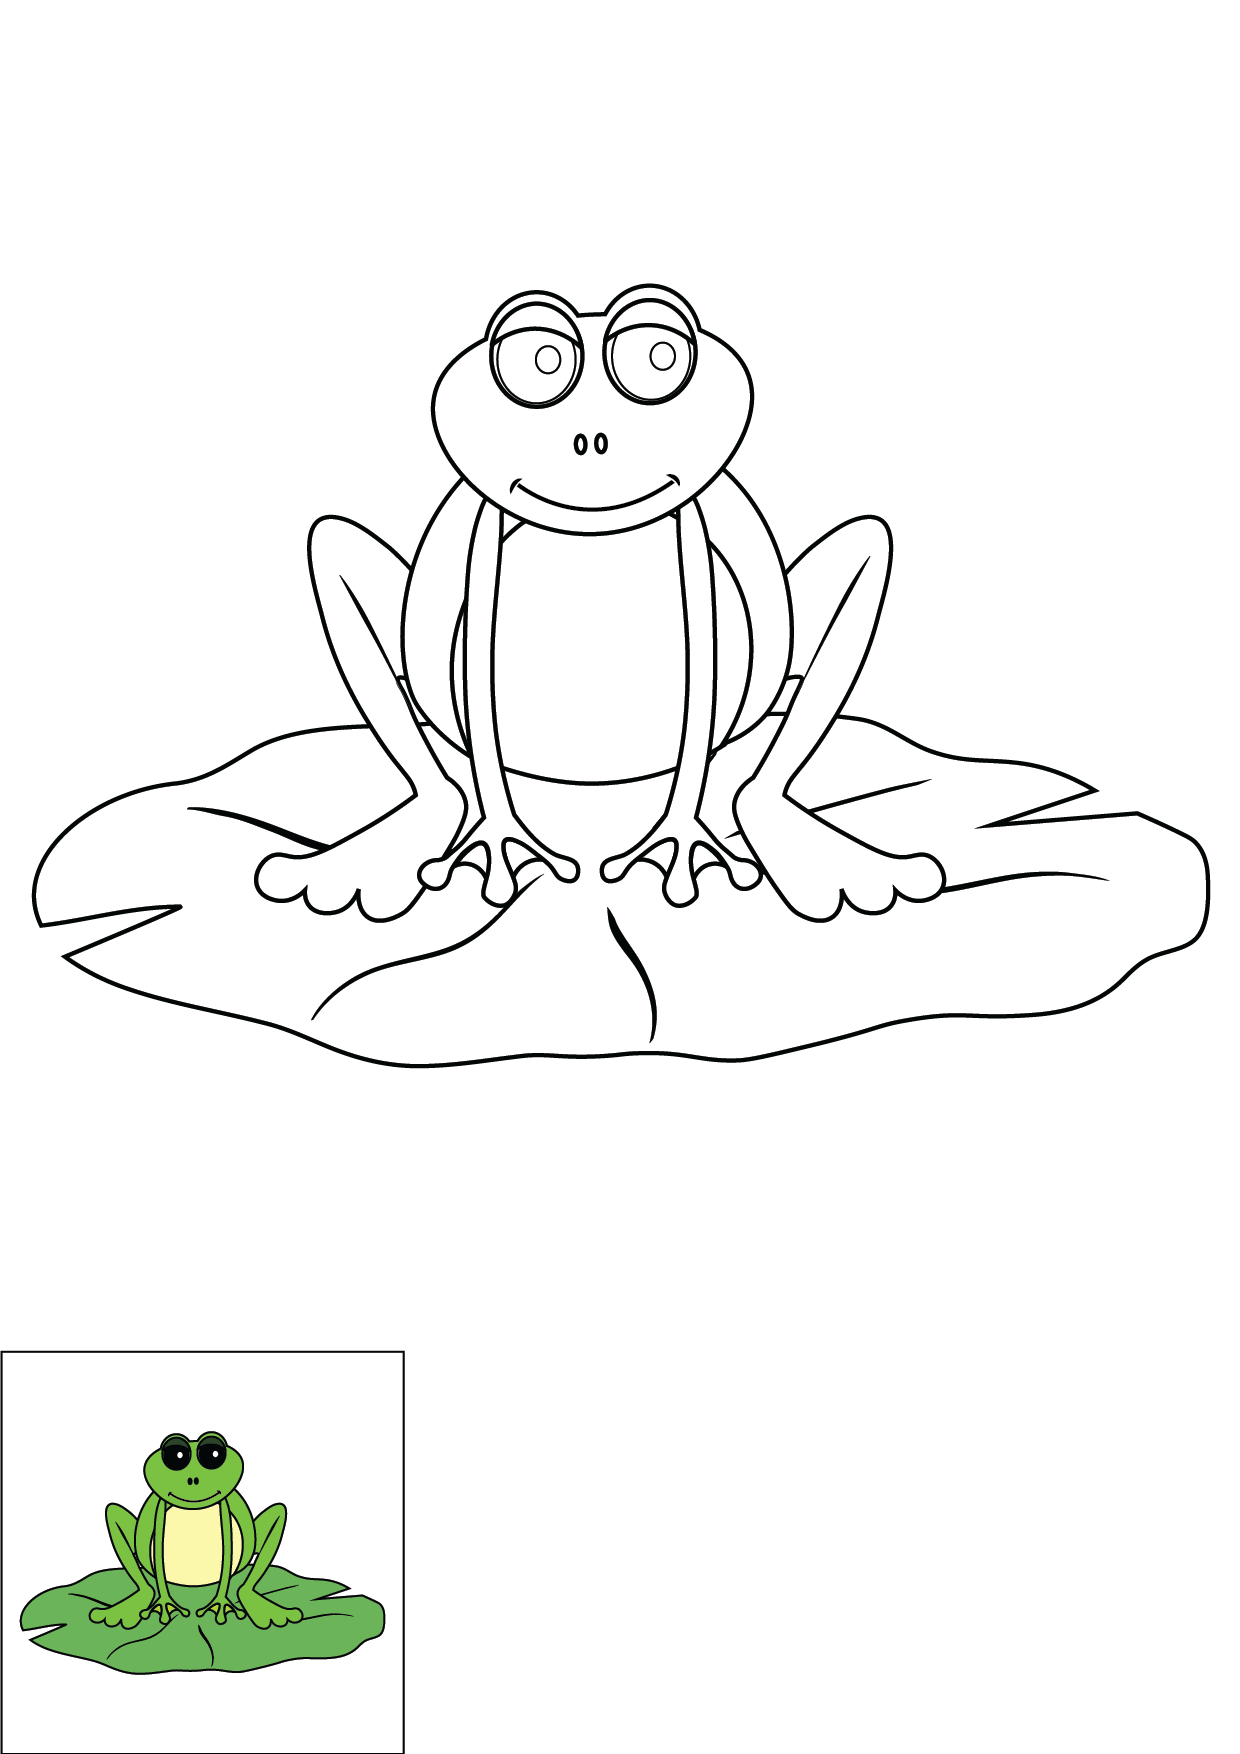 How to Draw A Frog Step by Step Printable Color